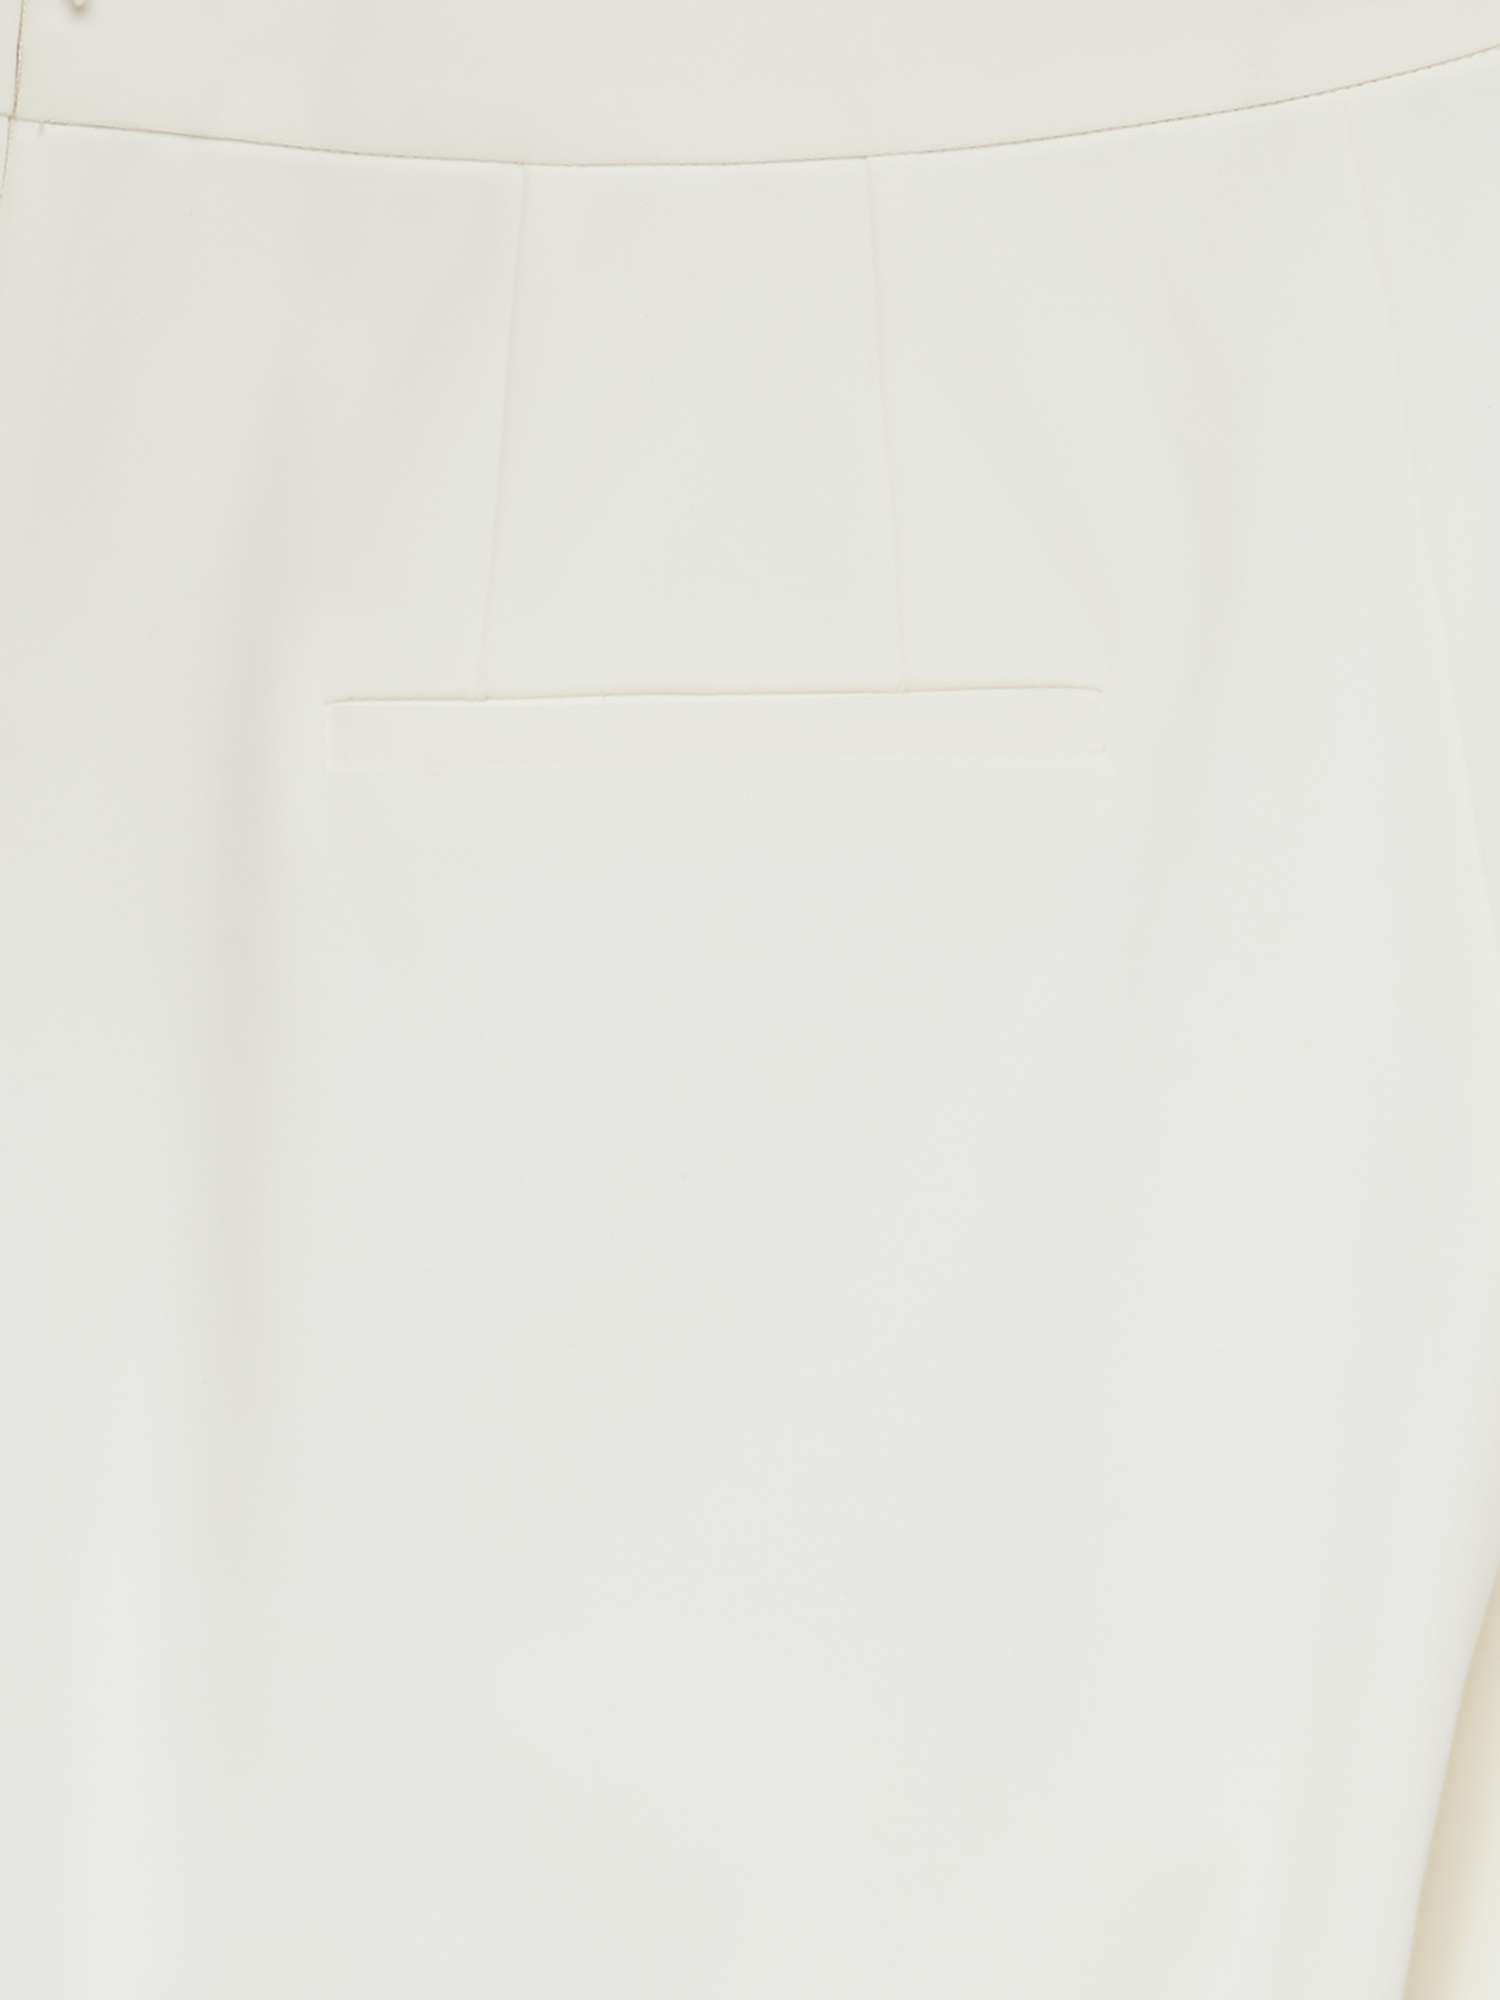 Buy Phase Eight Solange Wide Leg Suit Trousers, Ivory Online at johnlewis.com